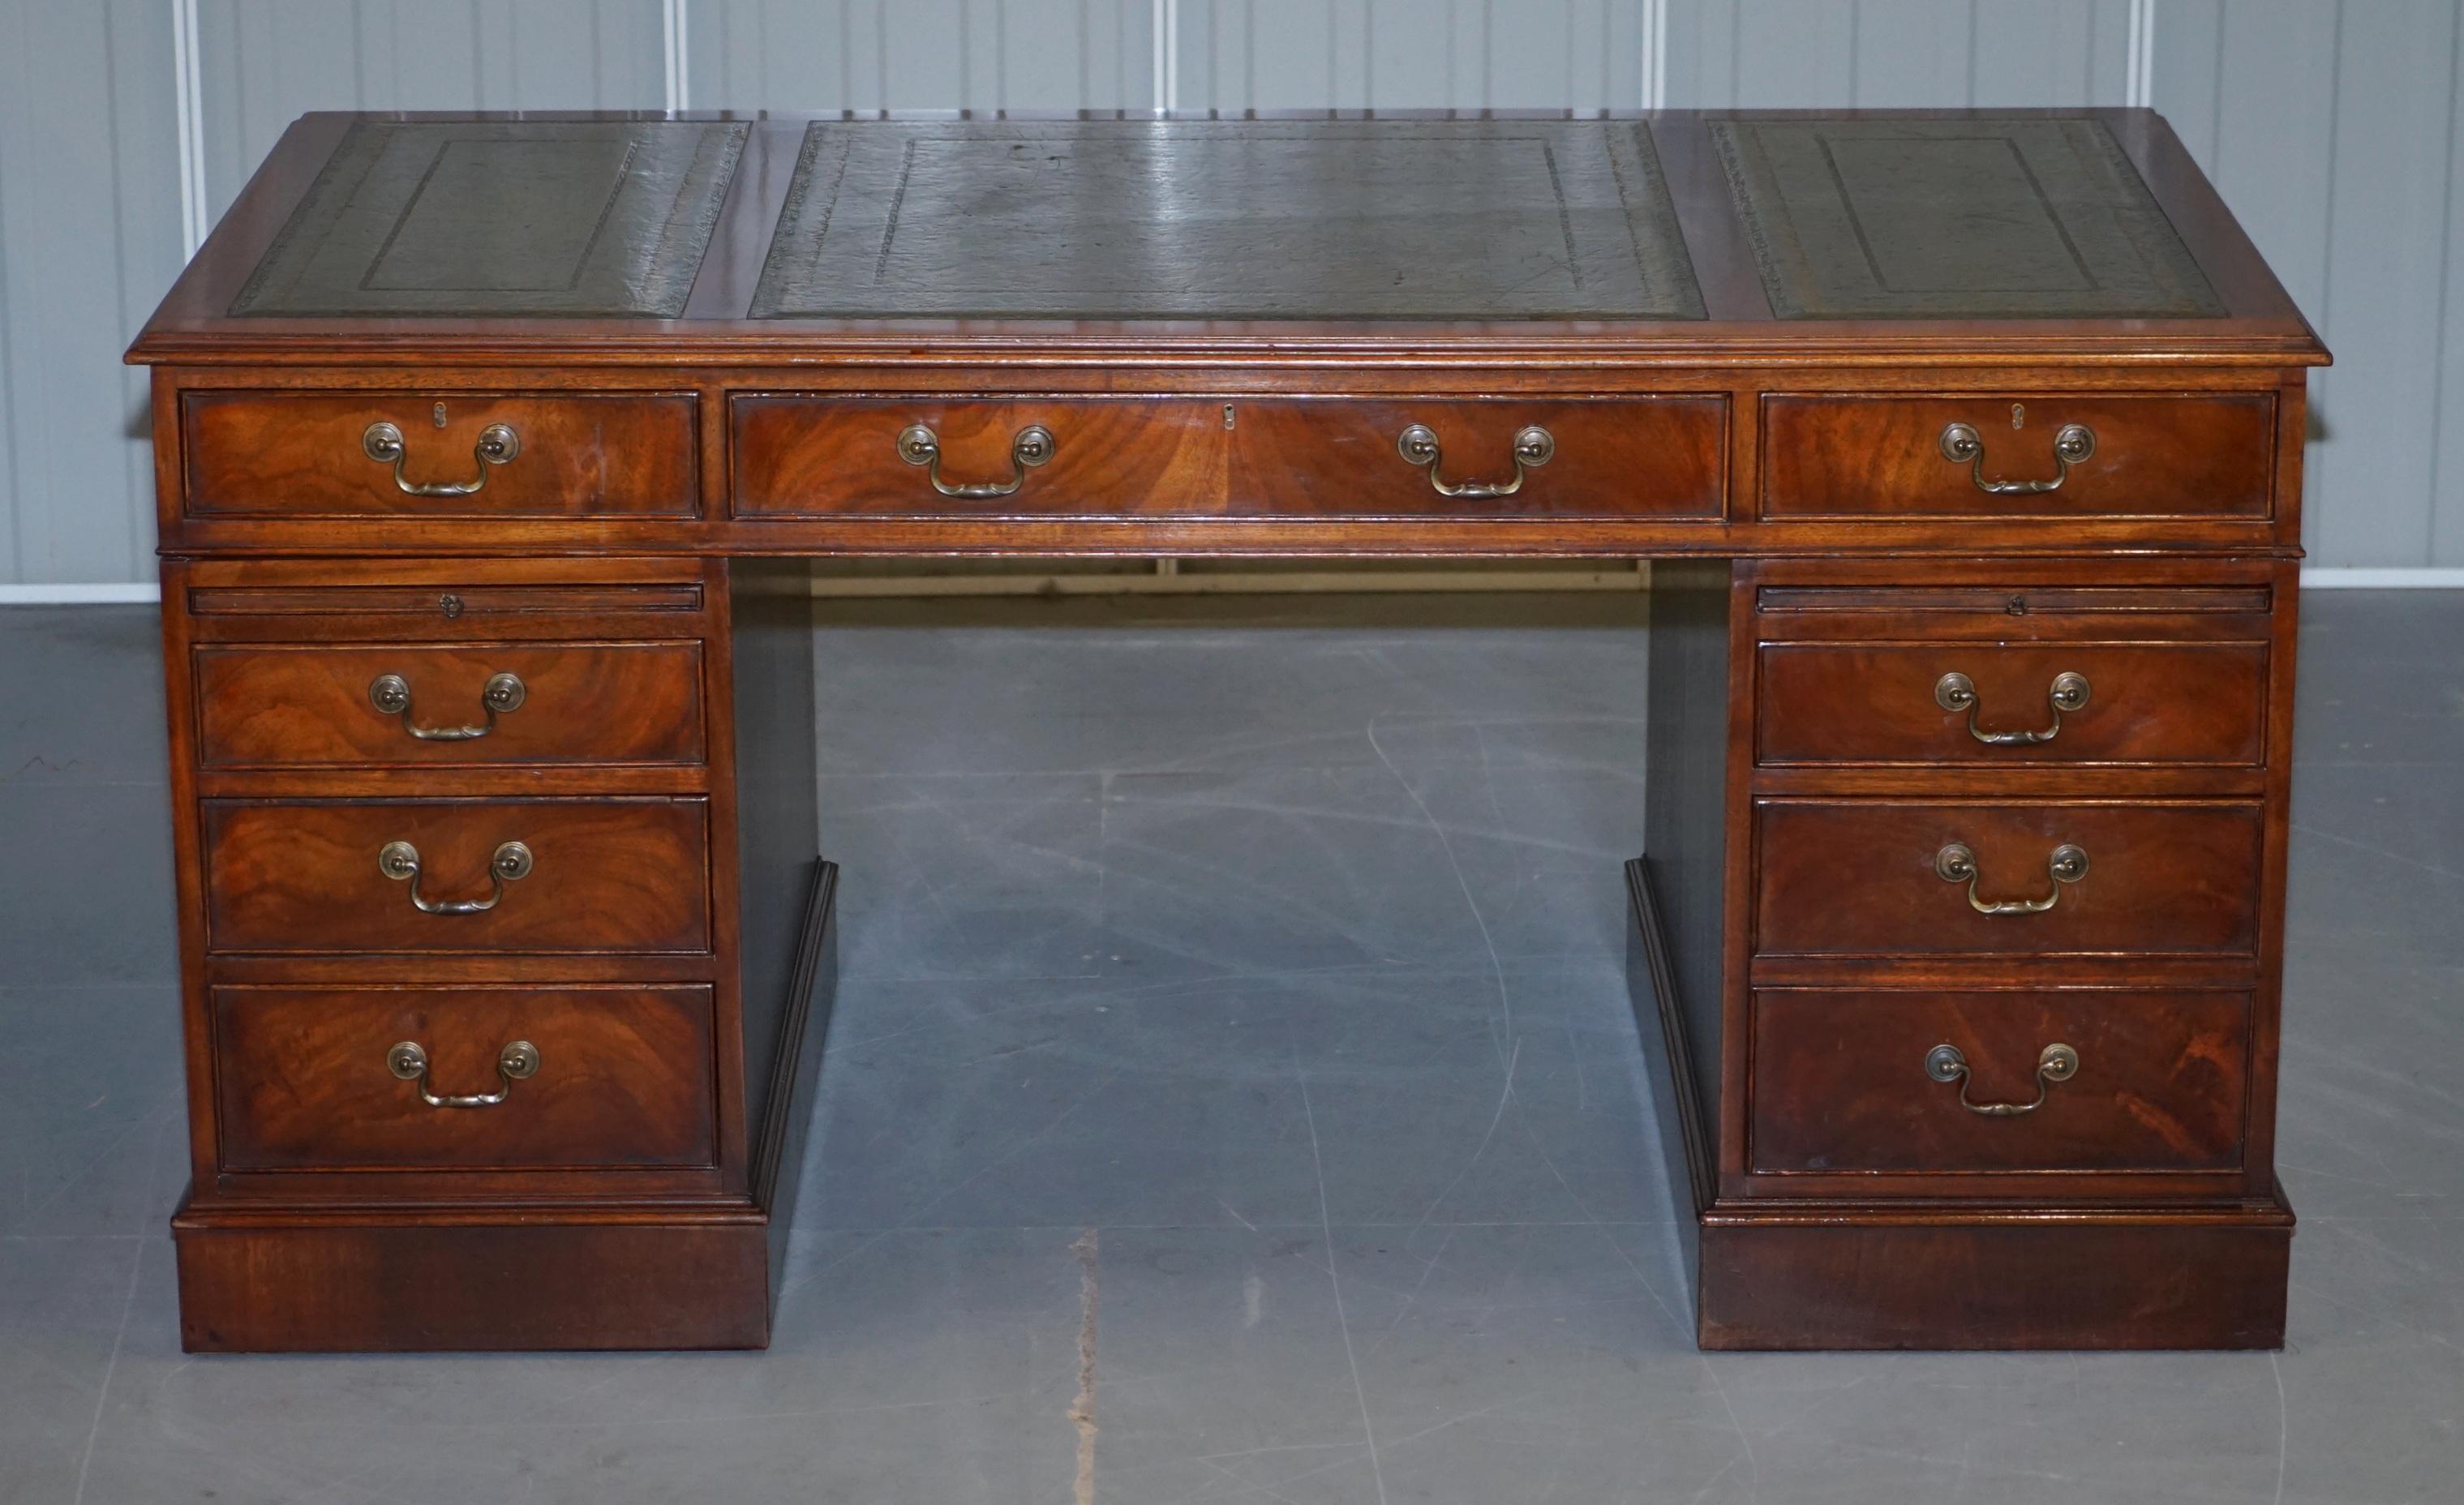 We are delighted to offer for sale this exquisite vintage hand made mahogany twin pedestal partner desk with green leather top and double butlers serving trays

A beautiful, desirable and a very unique piece, the desk is made with a lovely grain